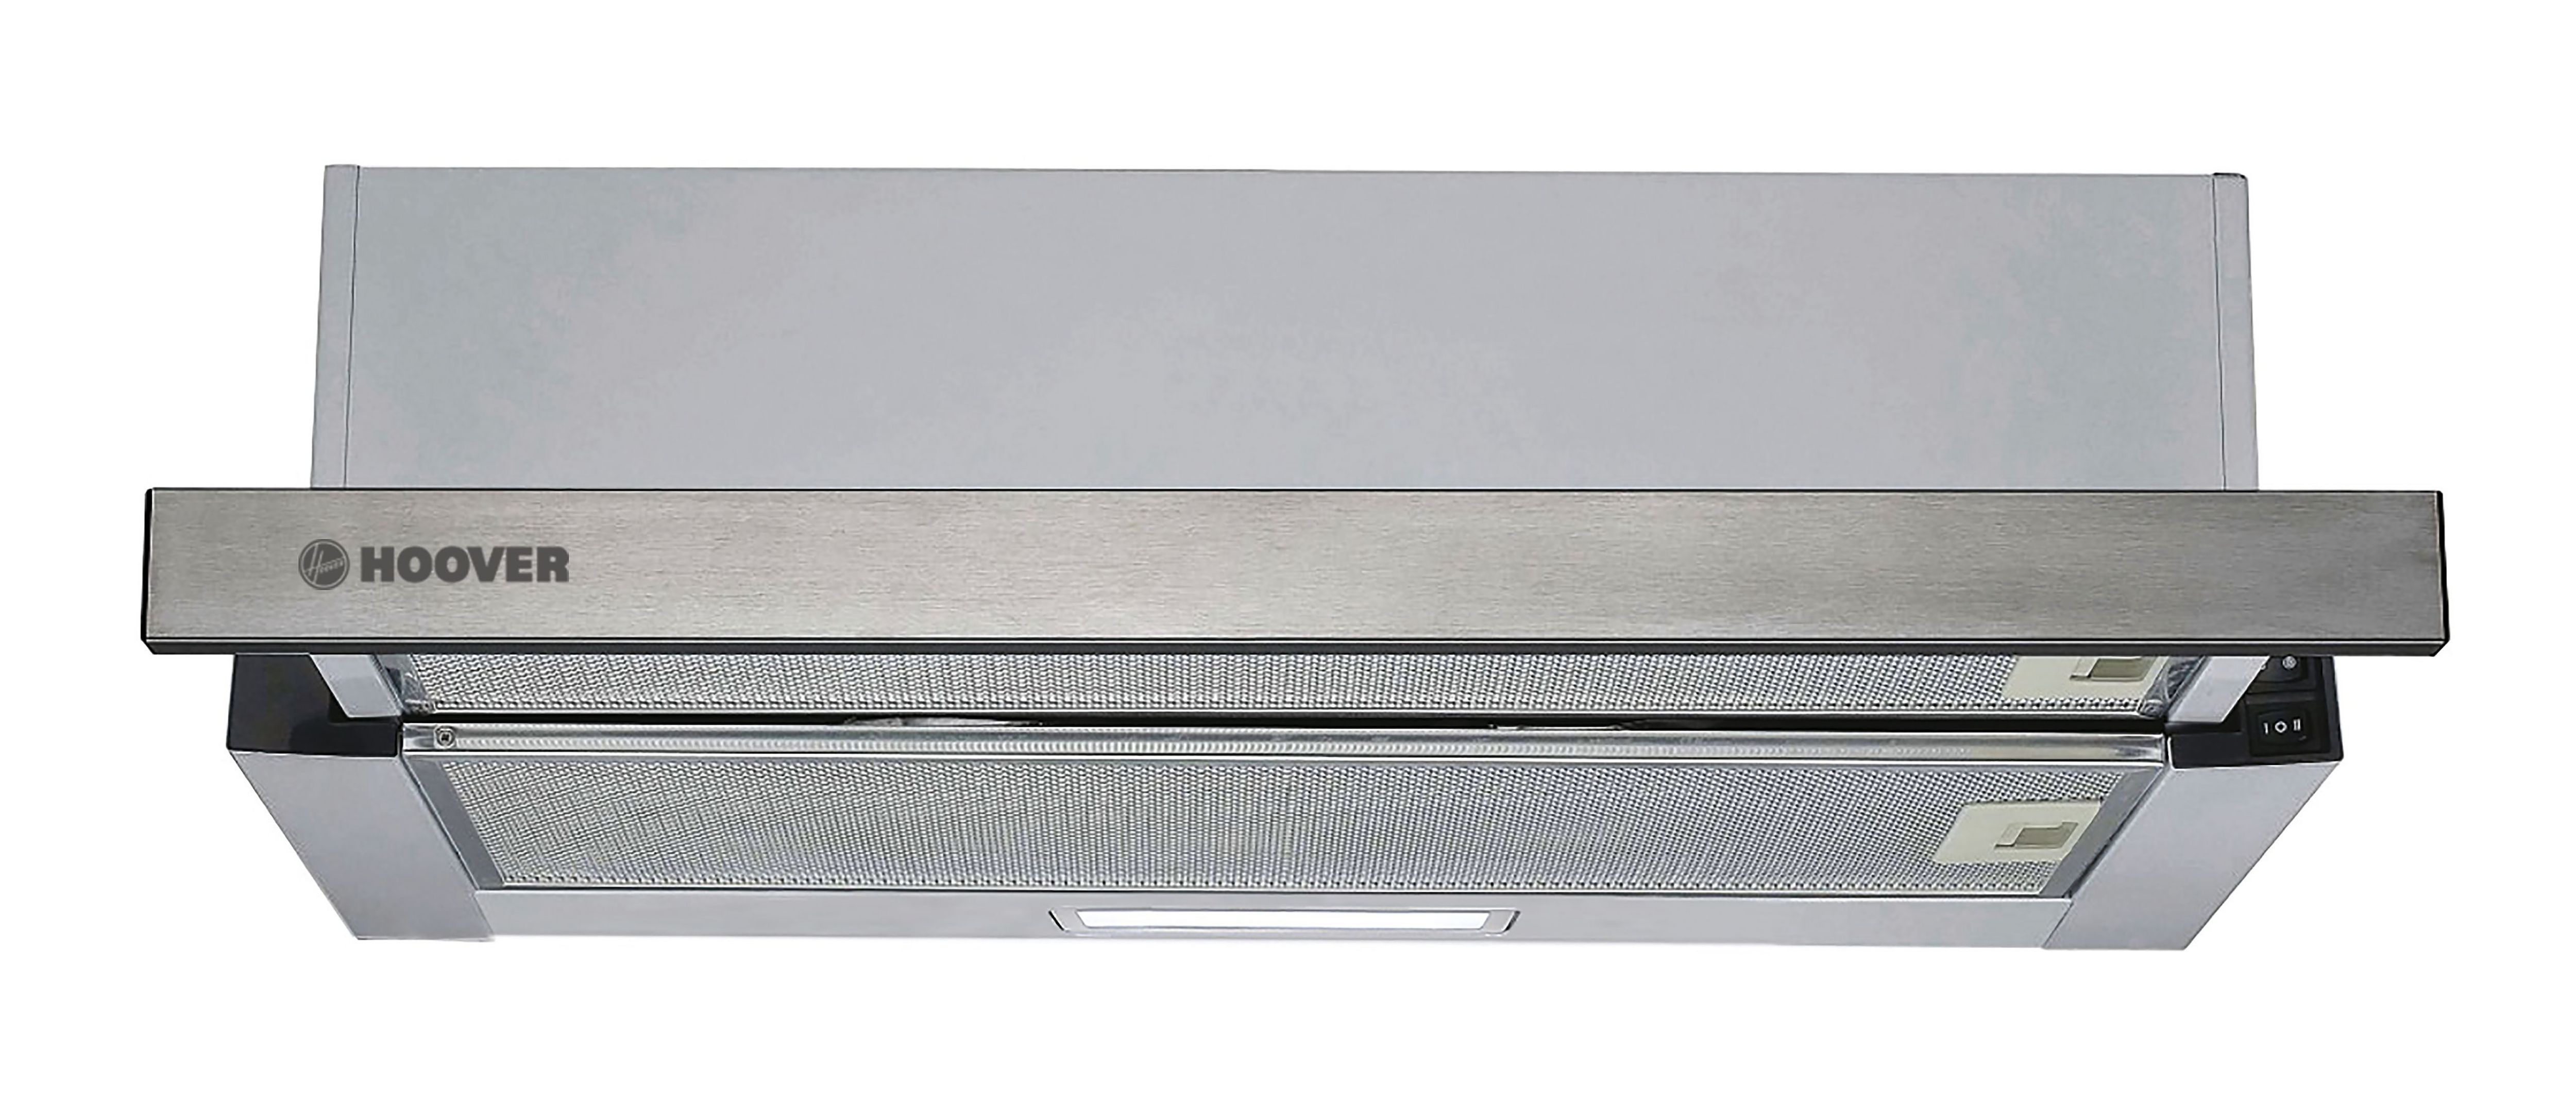 Hoover H-Hood 100 HHT6300/2X/1 / 36901789 Telescopic Cooker hood (W)60cm - Stainless steel effect